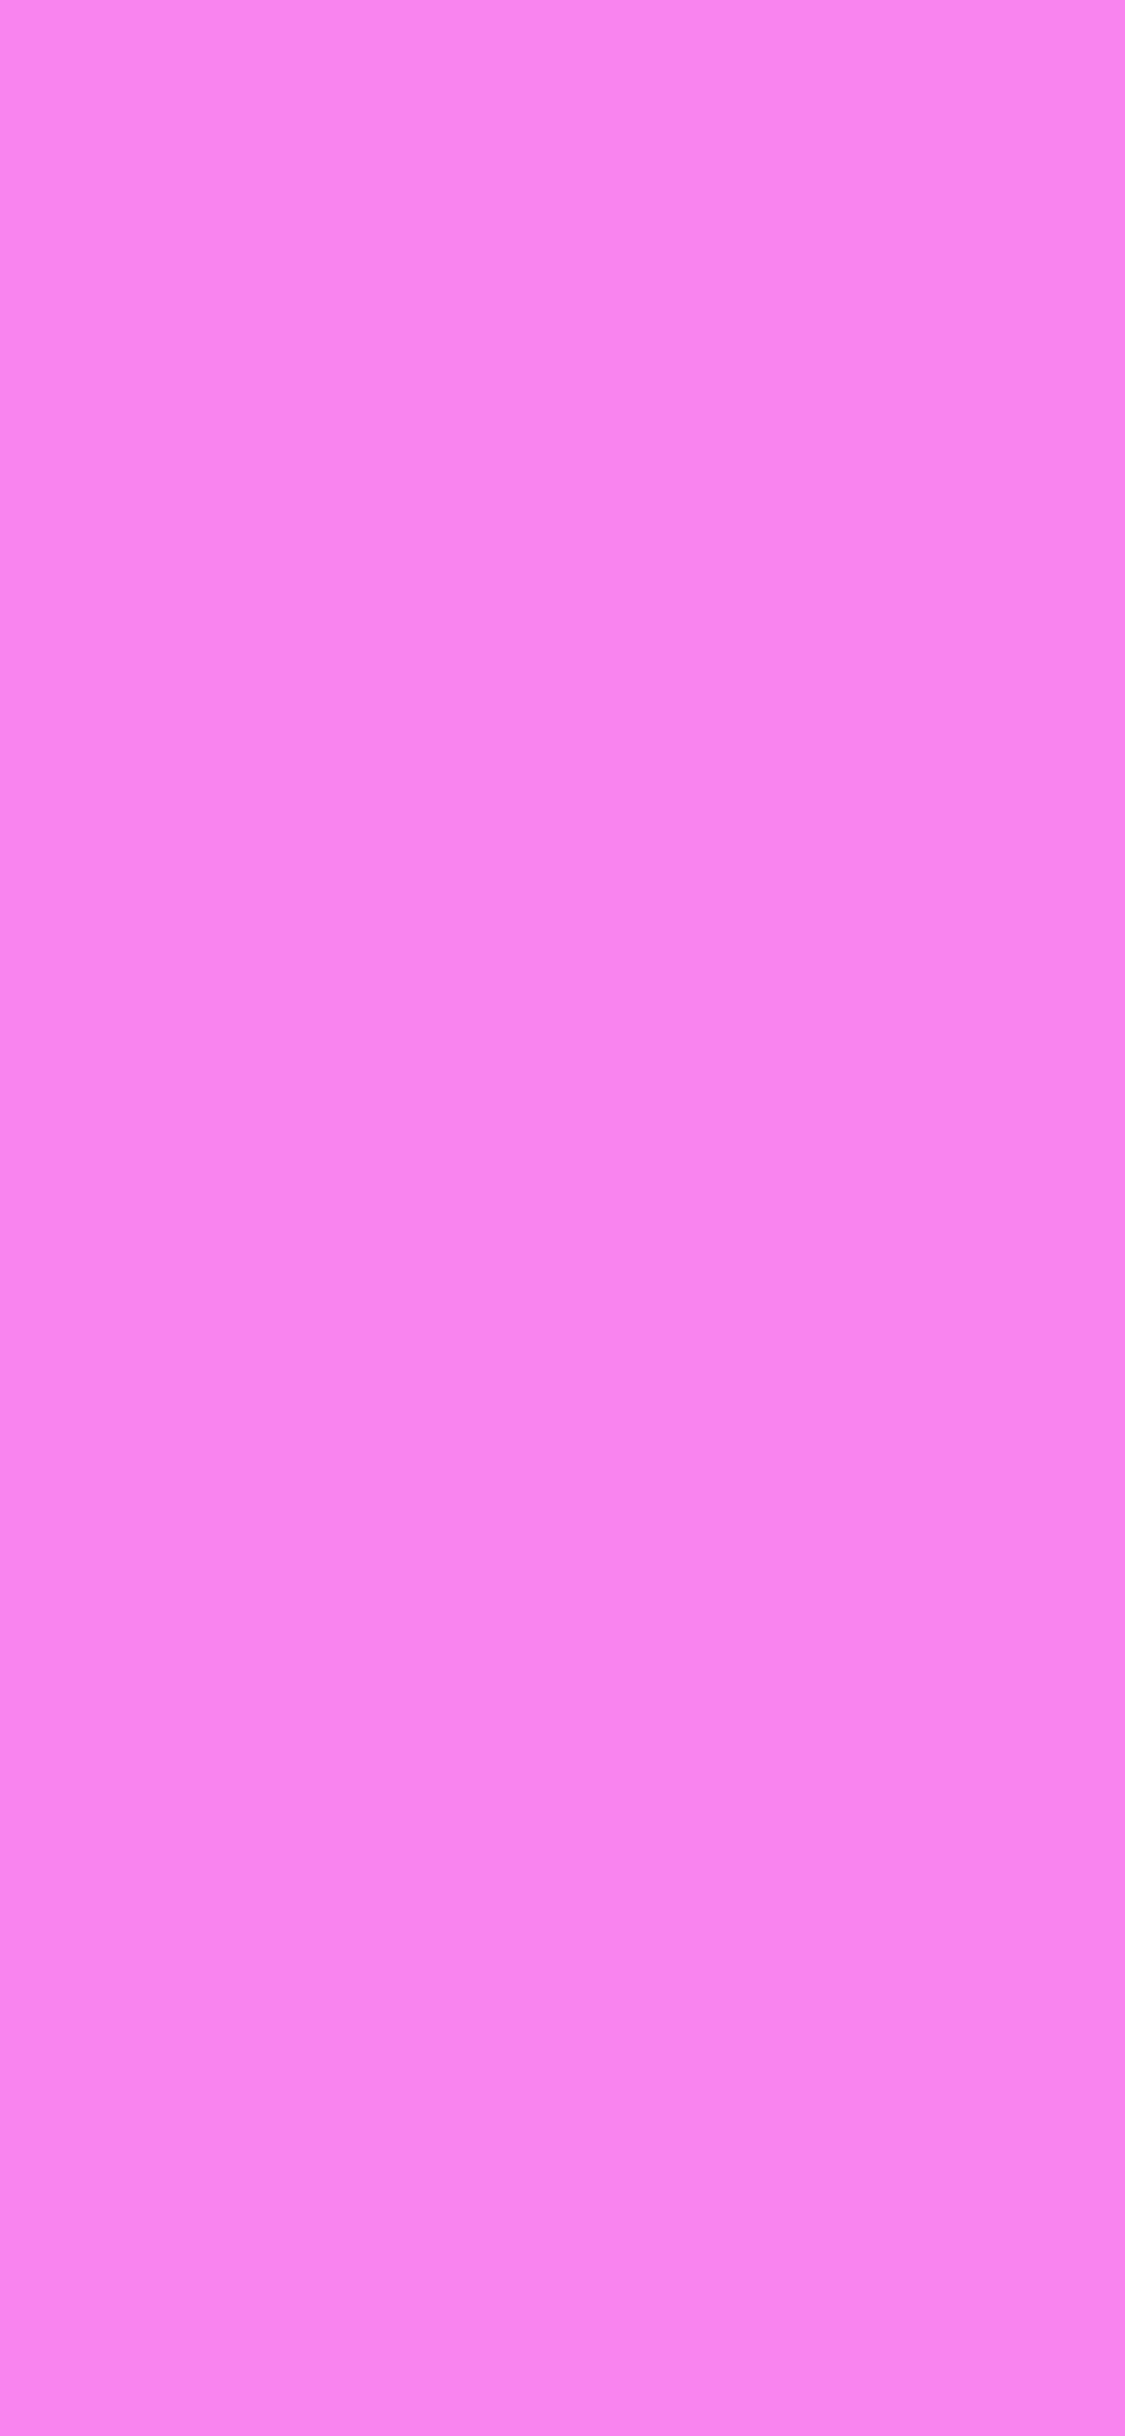 1125x2436 Light Fuchsia Pink Solid Color Background